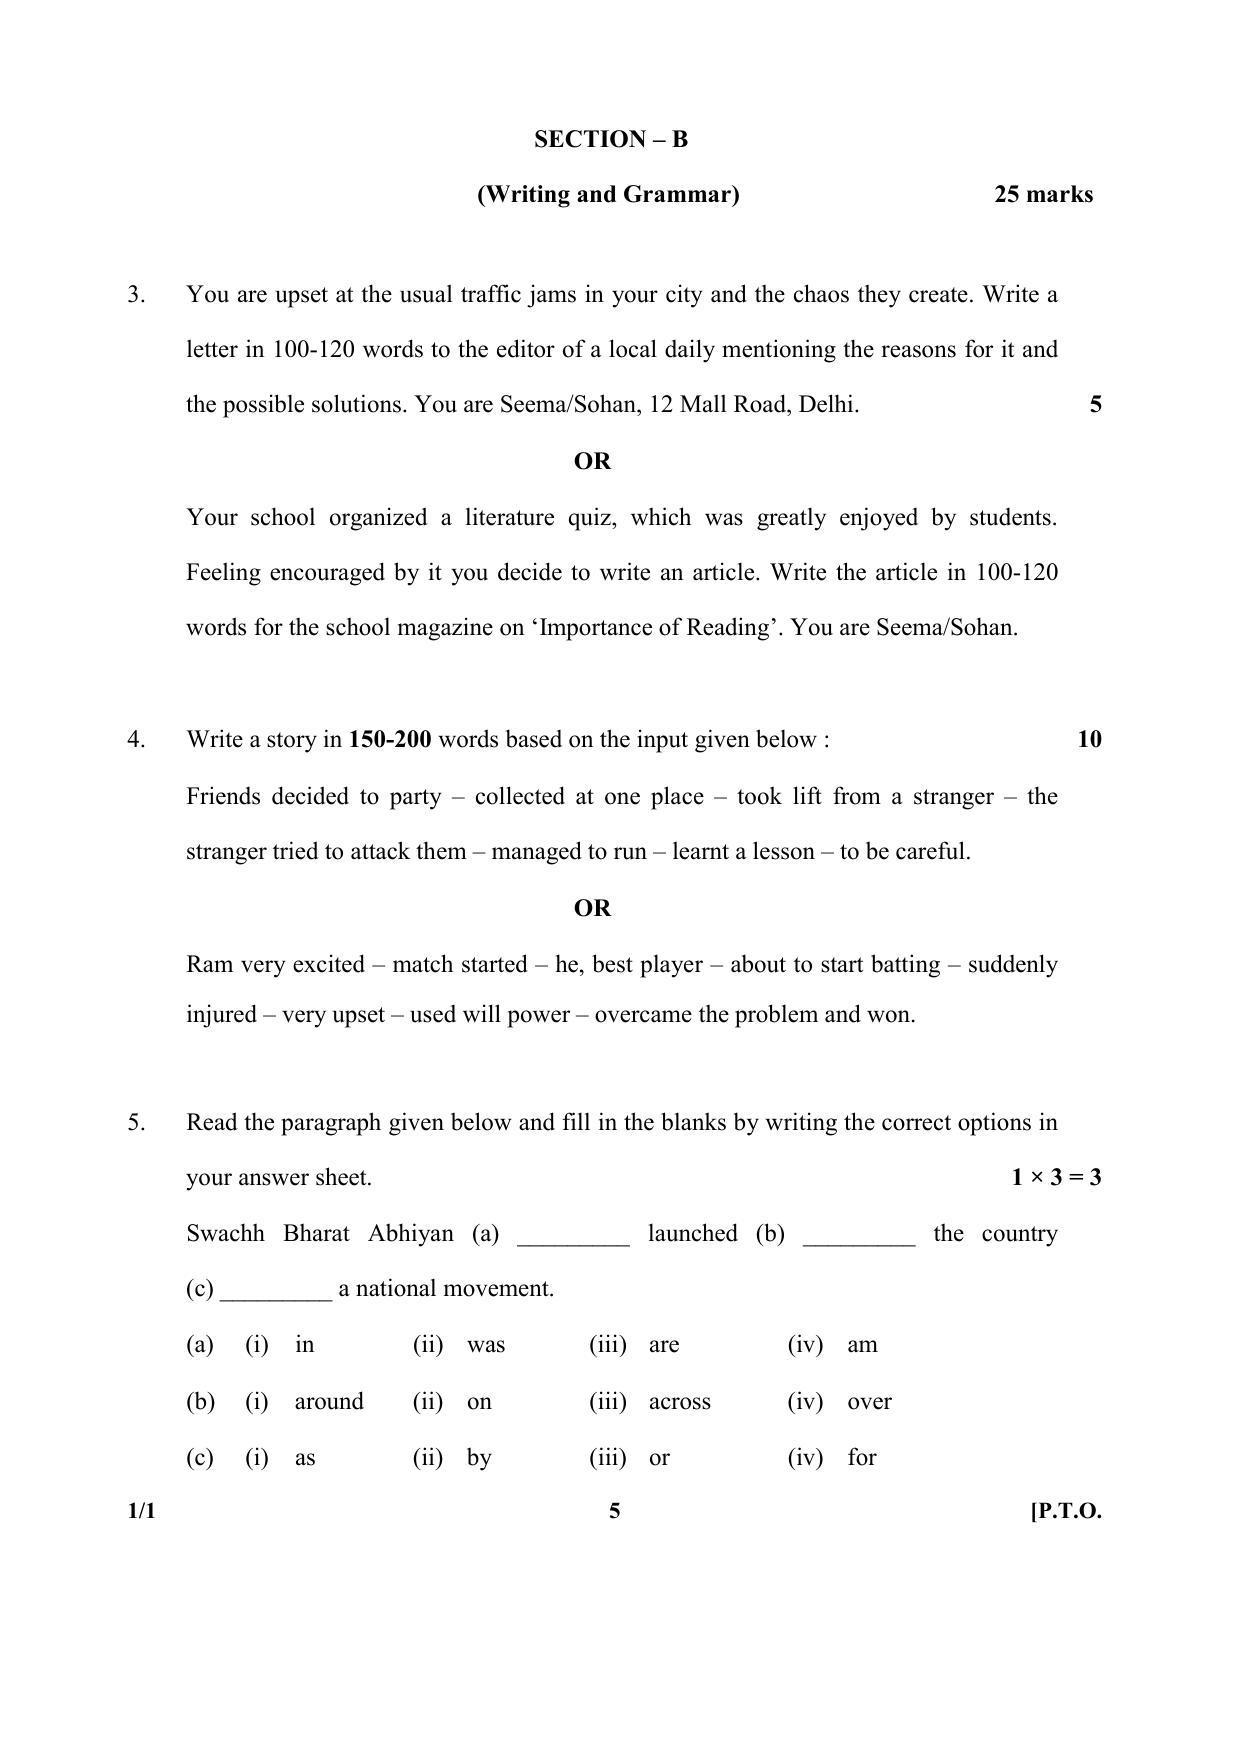 CBSE Class 10 1-1 (English) 2017-comptt Question Paper - Page 5